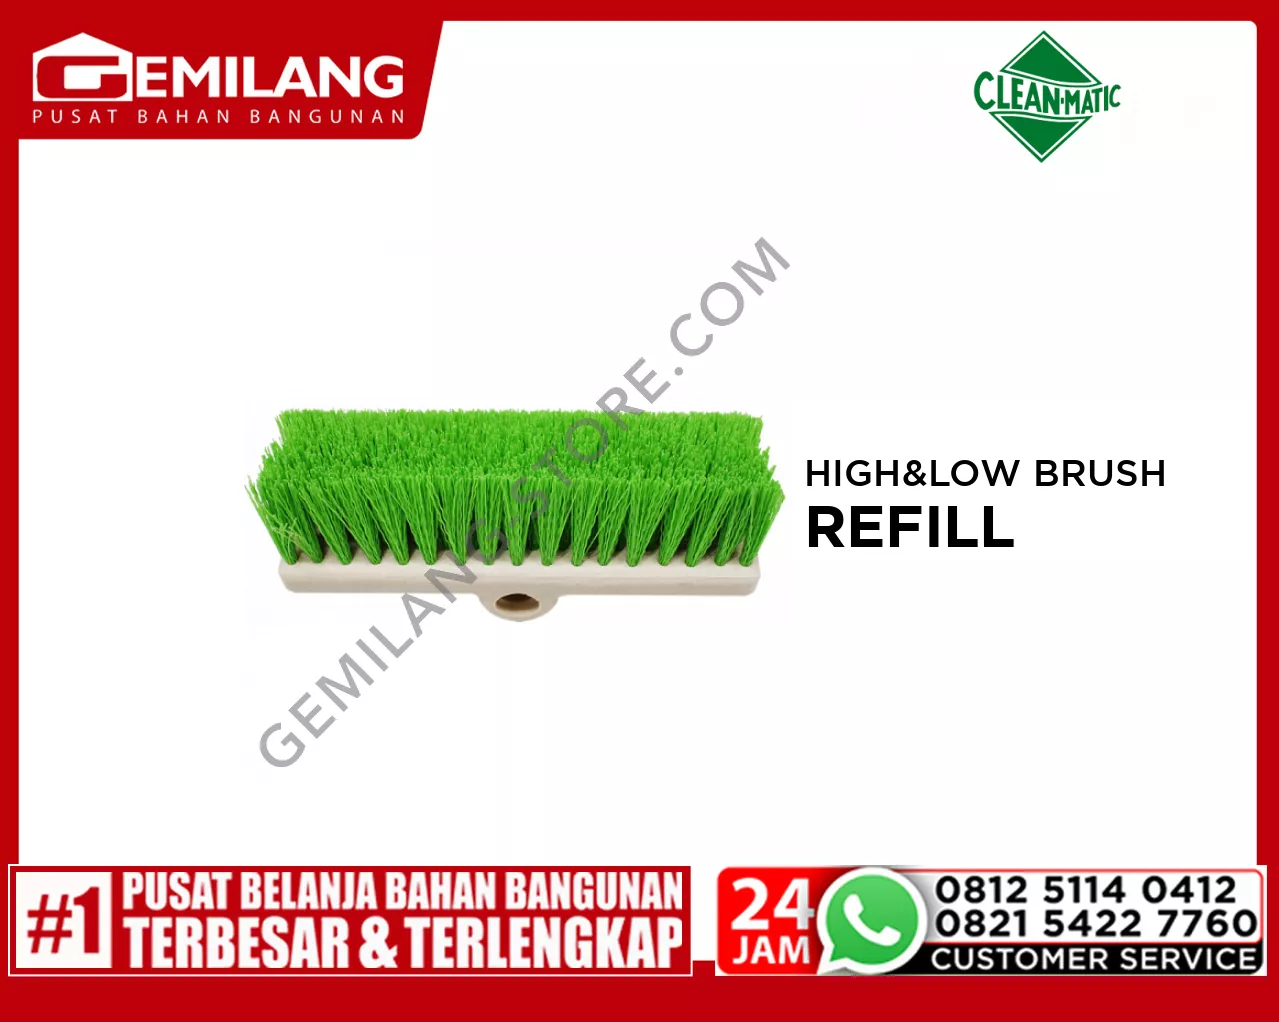 CLEAN MATIC HIGH & LOW BRUSH REFILL